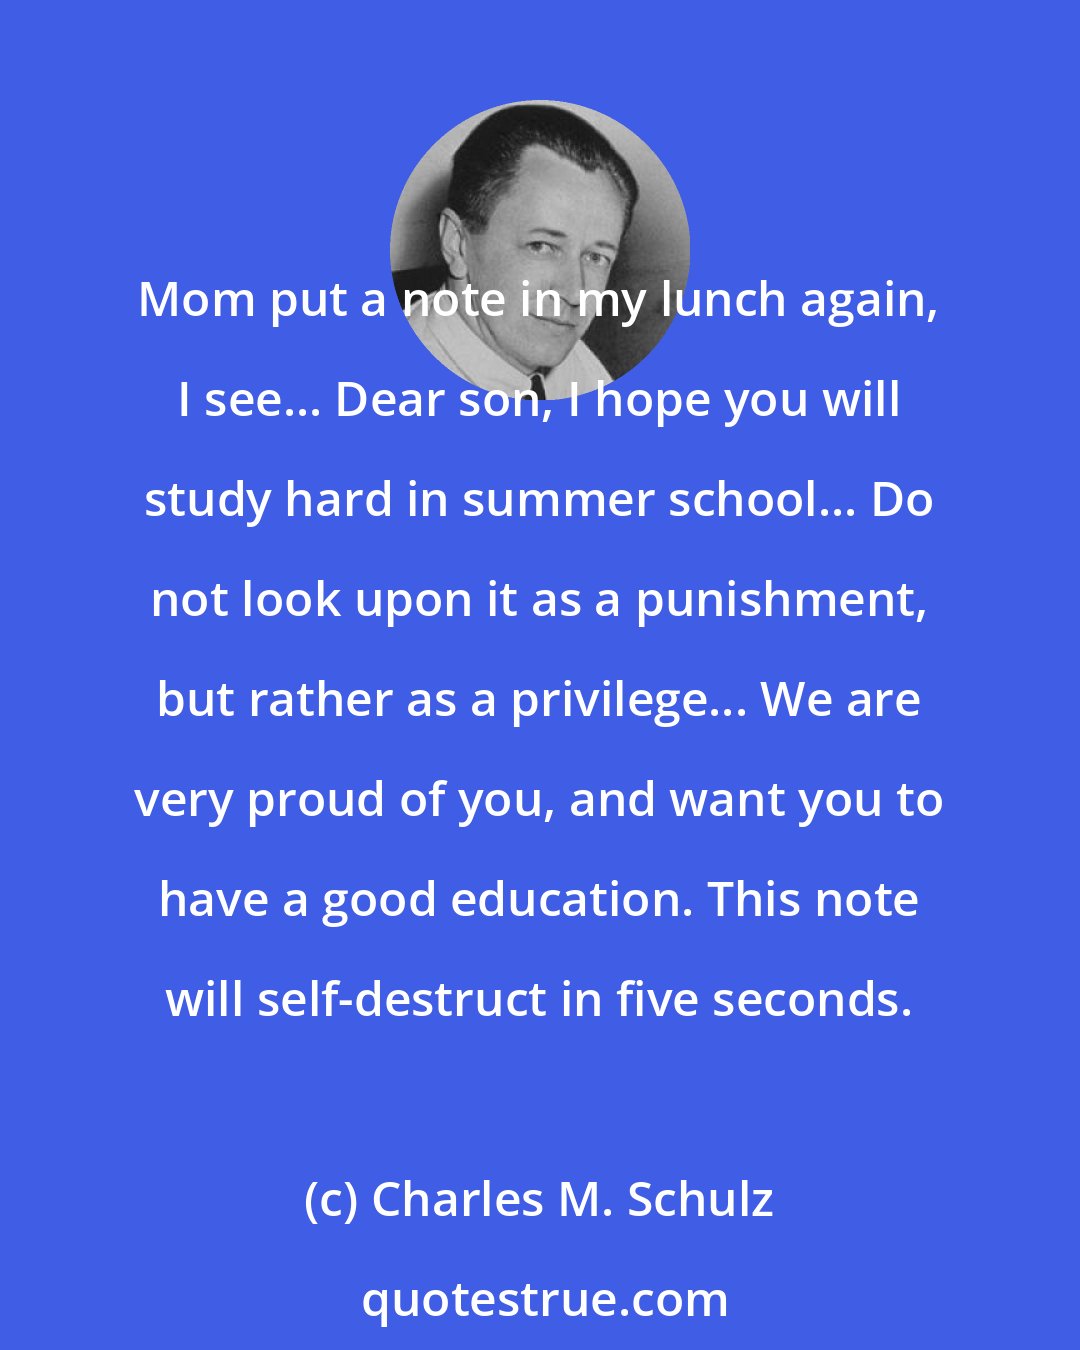 Charles M. Schulz: Mom put a note in my lunch again, I see... Dear son, I hope you will study hard in summer school... Do not look upon it as a punishment, but rather as a privilege... We are very proud of you, and want you to have a good education. This note will self-destruct in five seconds.